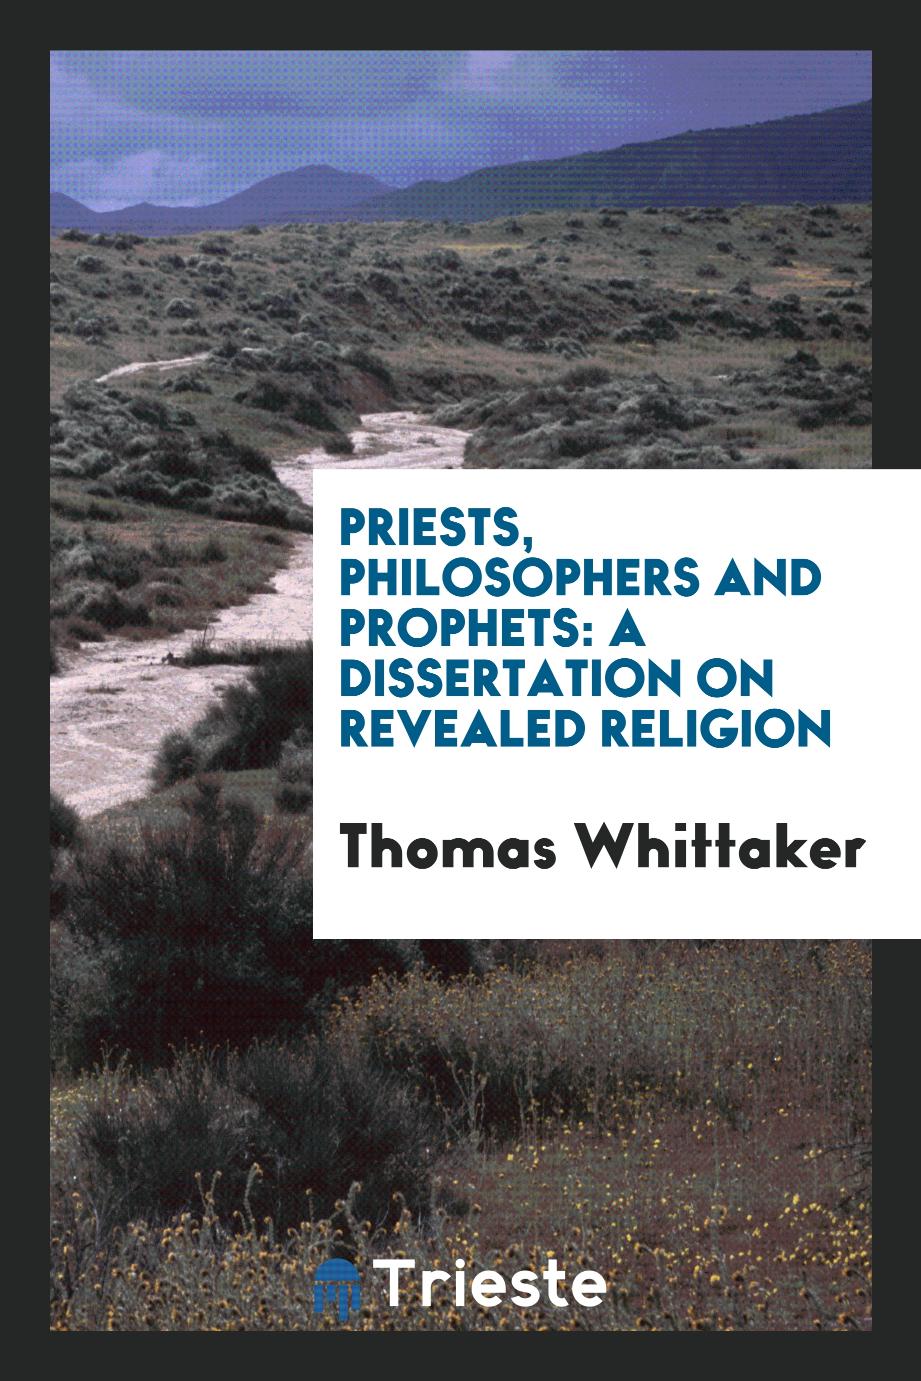 Priests, philosophers and prophets: a dissertation on revealed religion